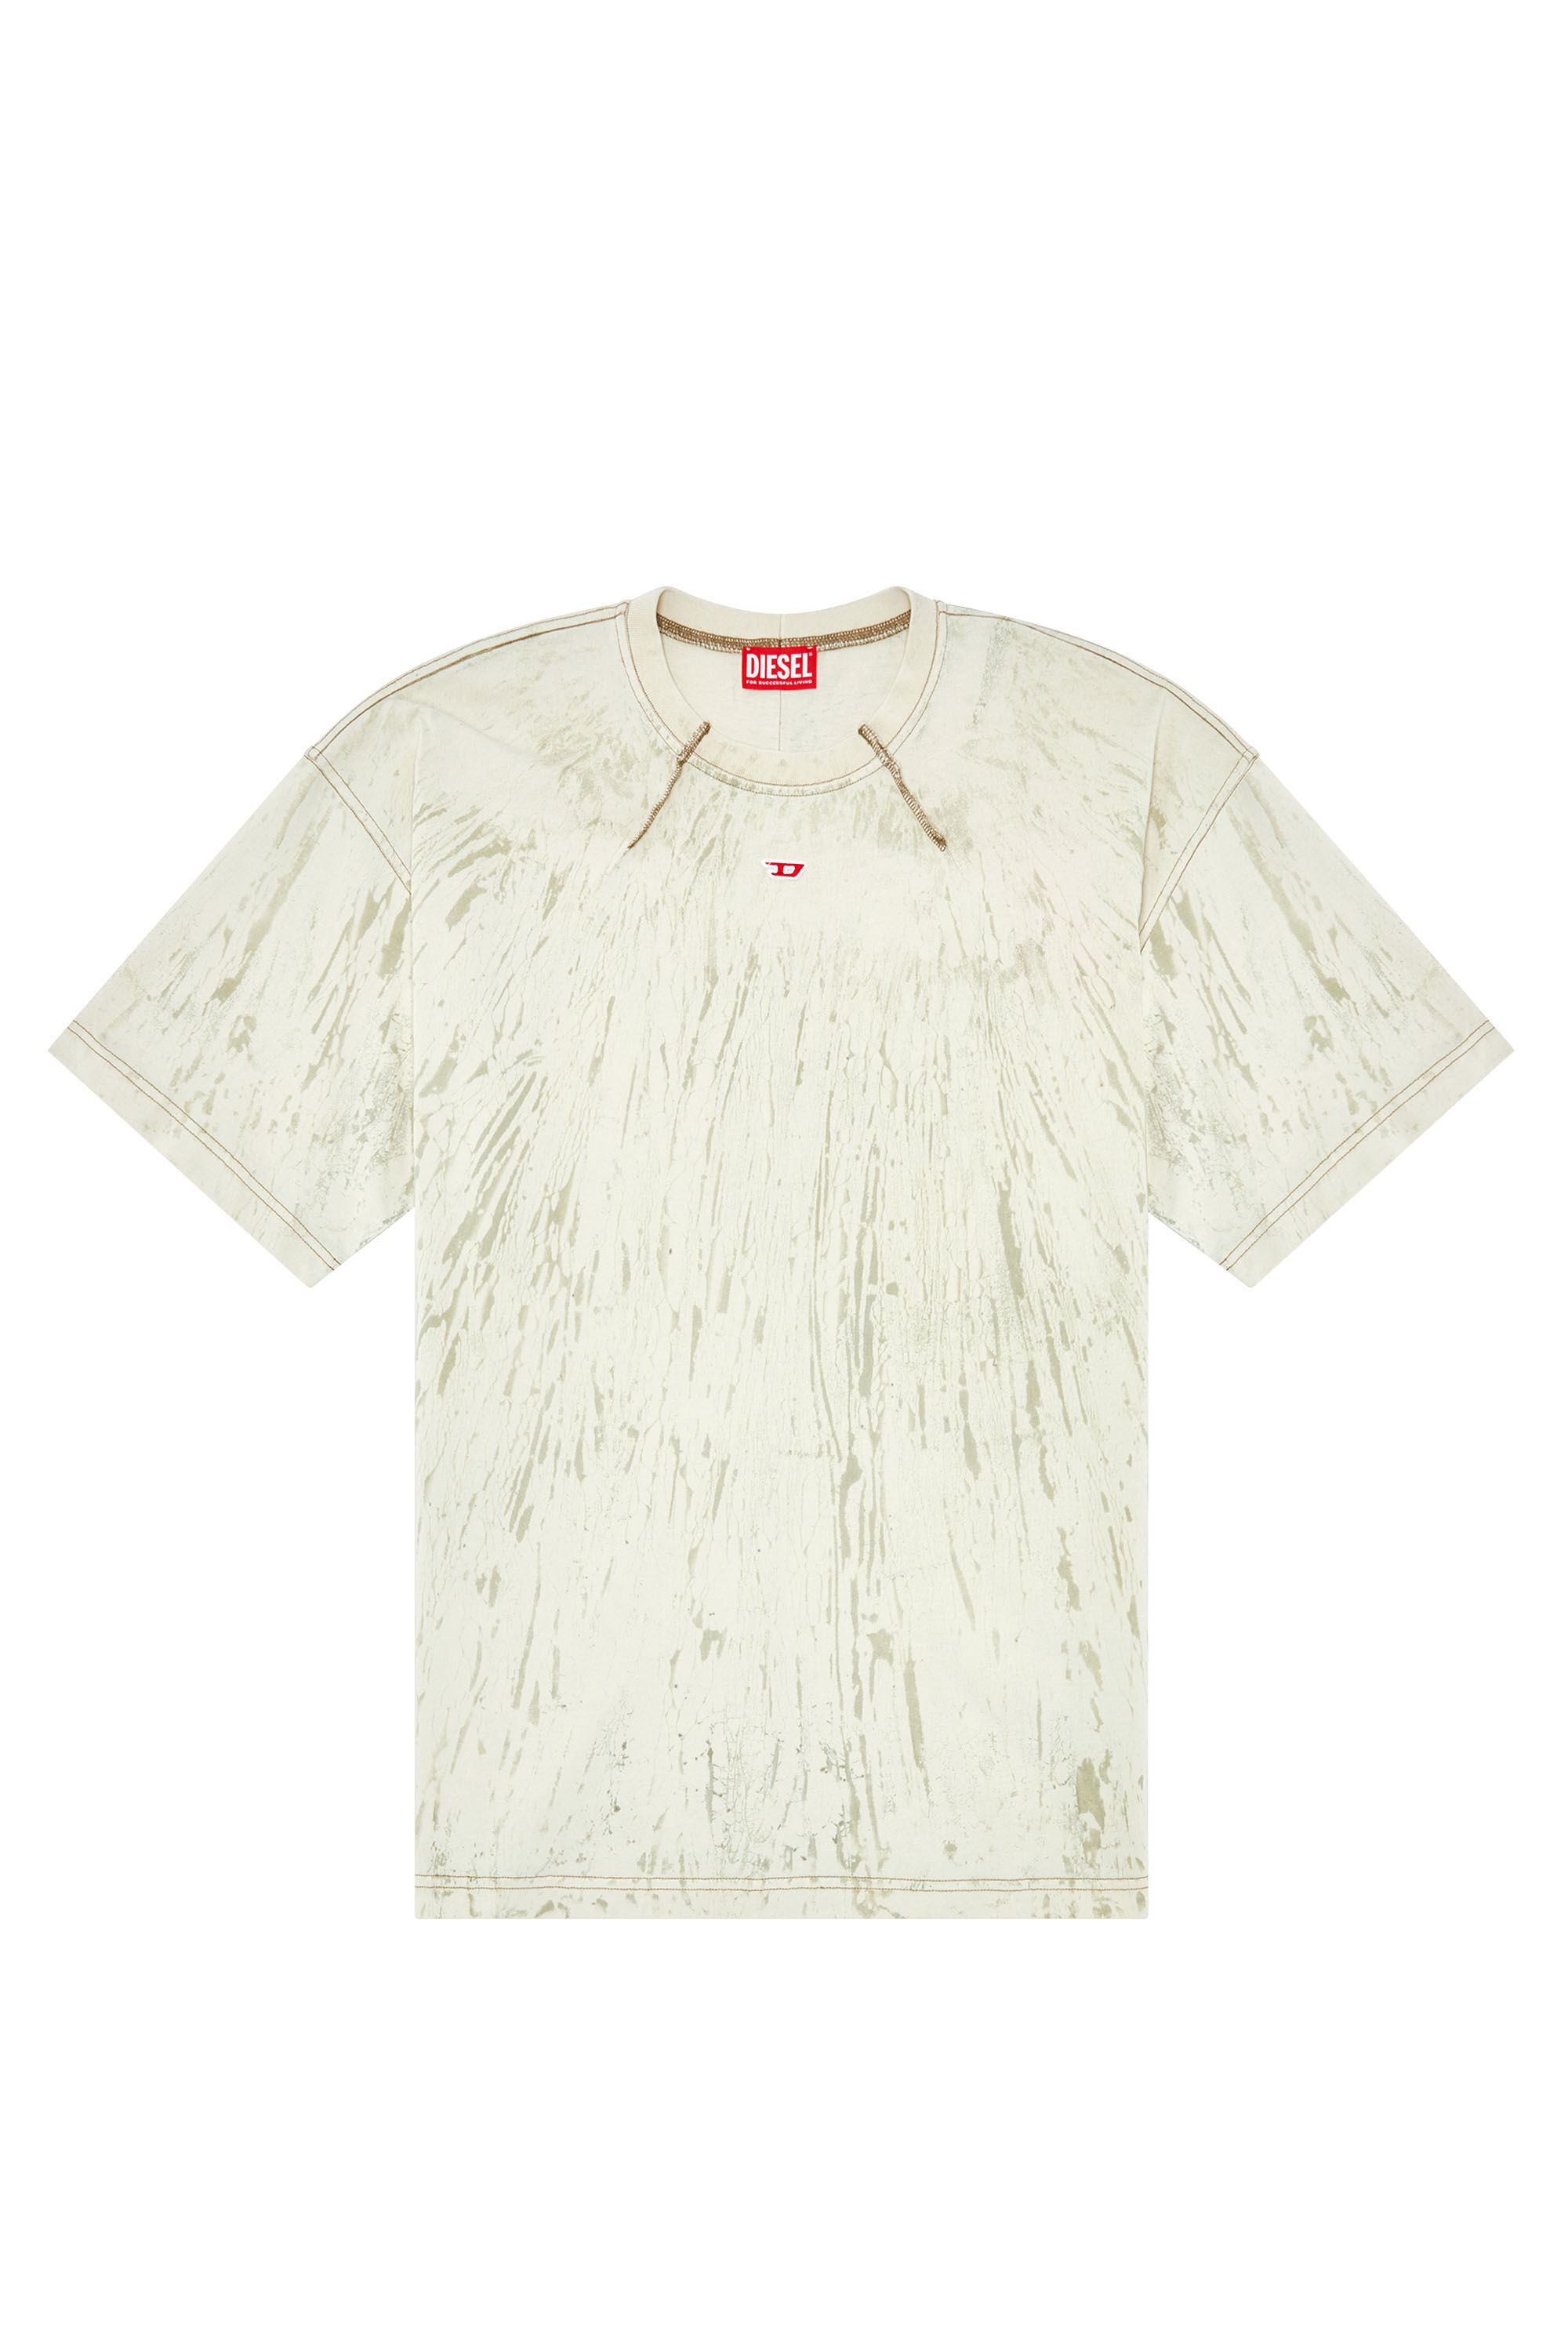 Diesel - T-COS, Man T-shirt in plaster effect jersey in White - Image 2